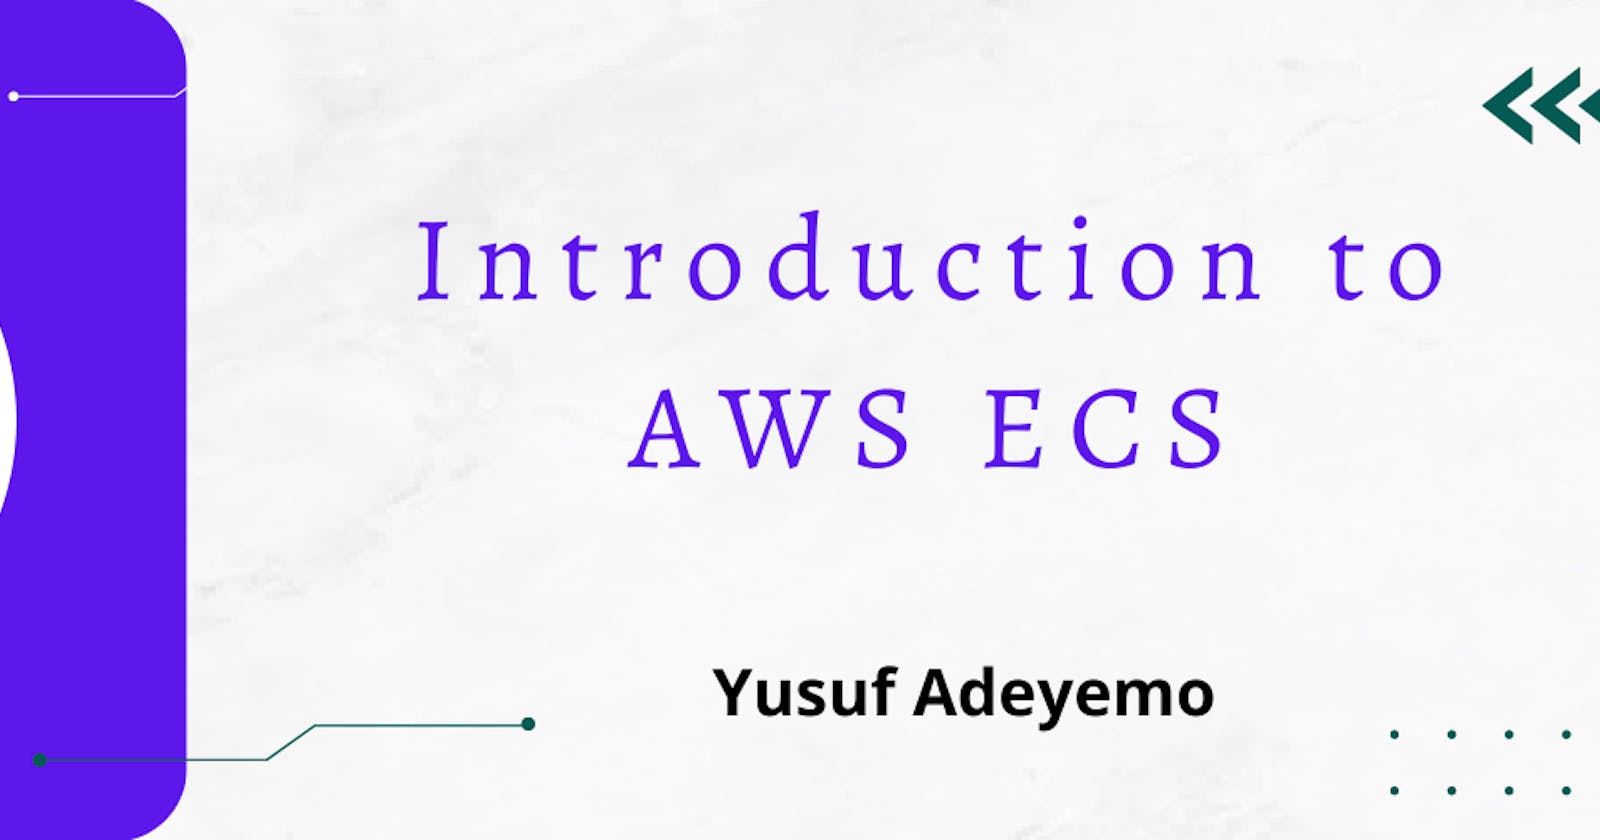 Introduction to ECS (Elastic Container Service)